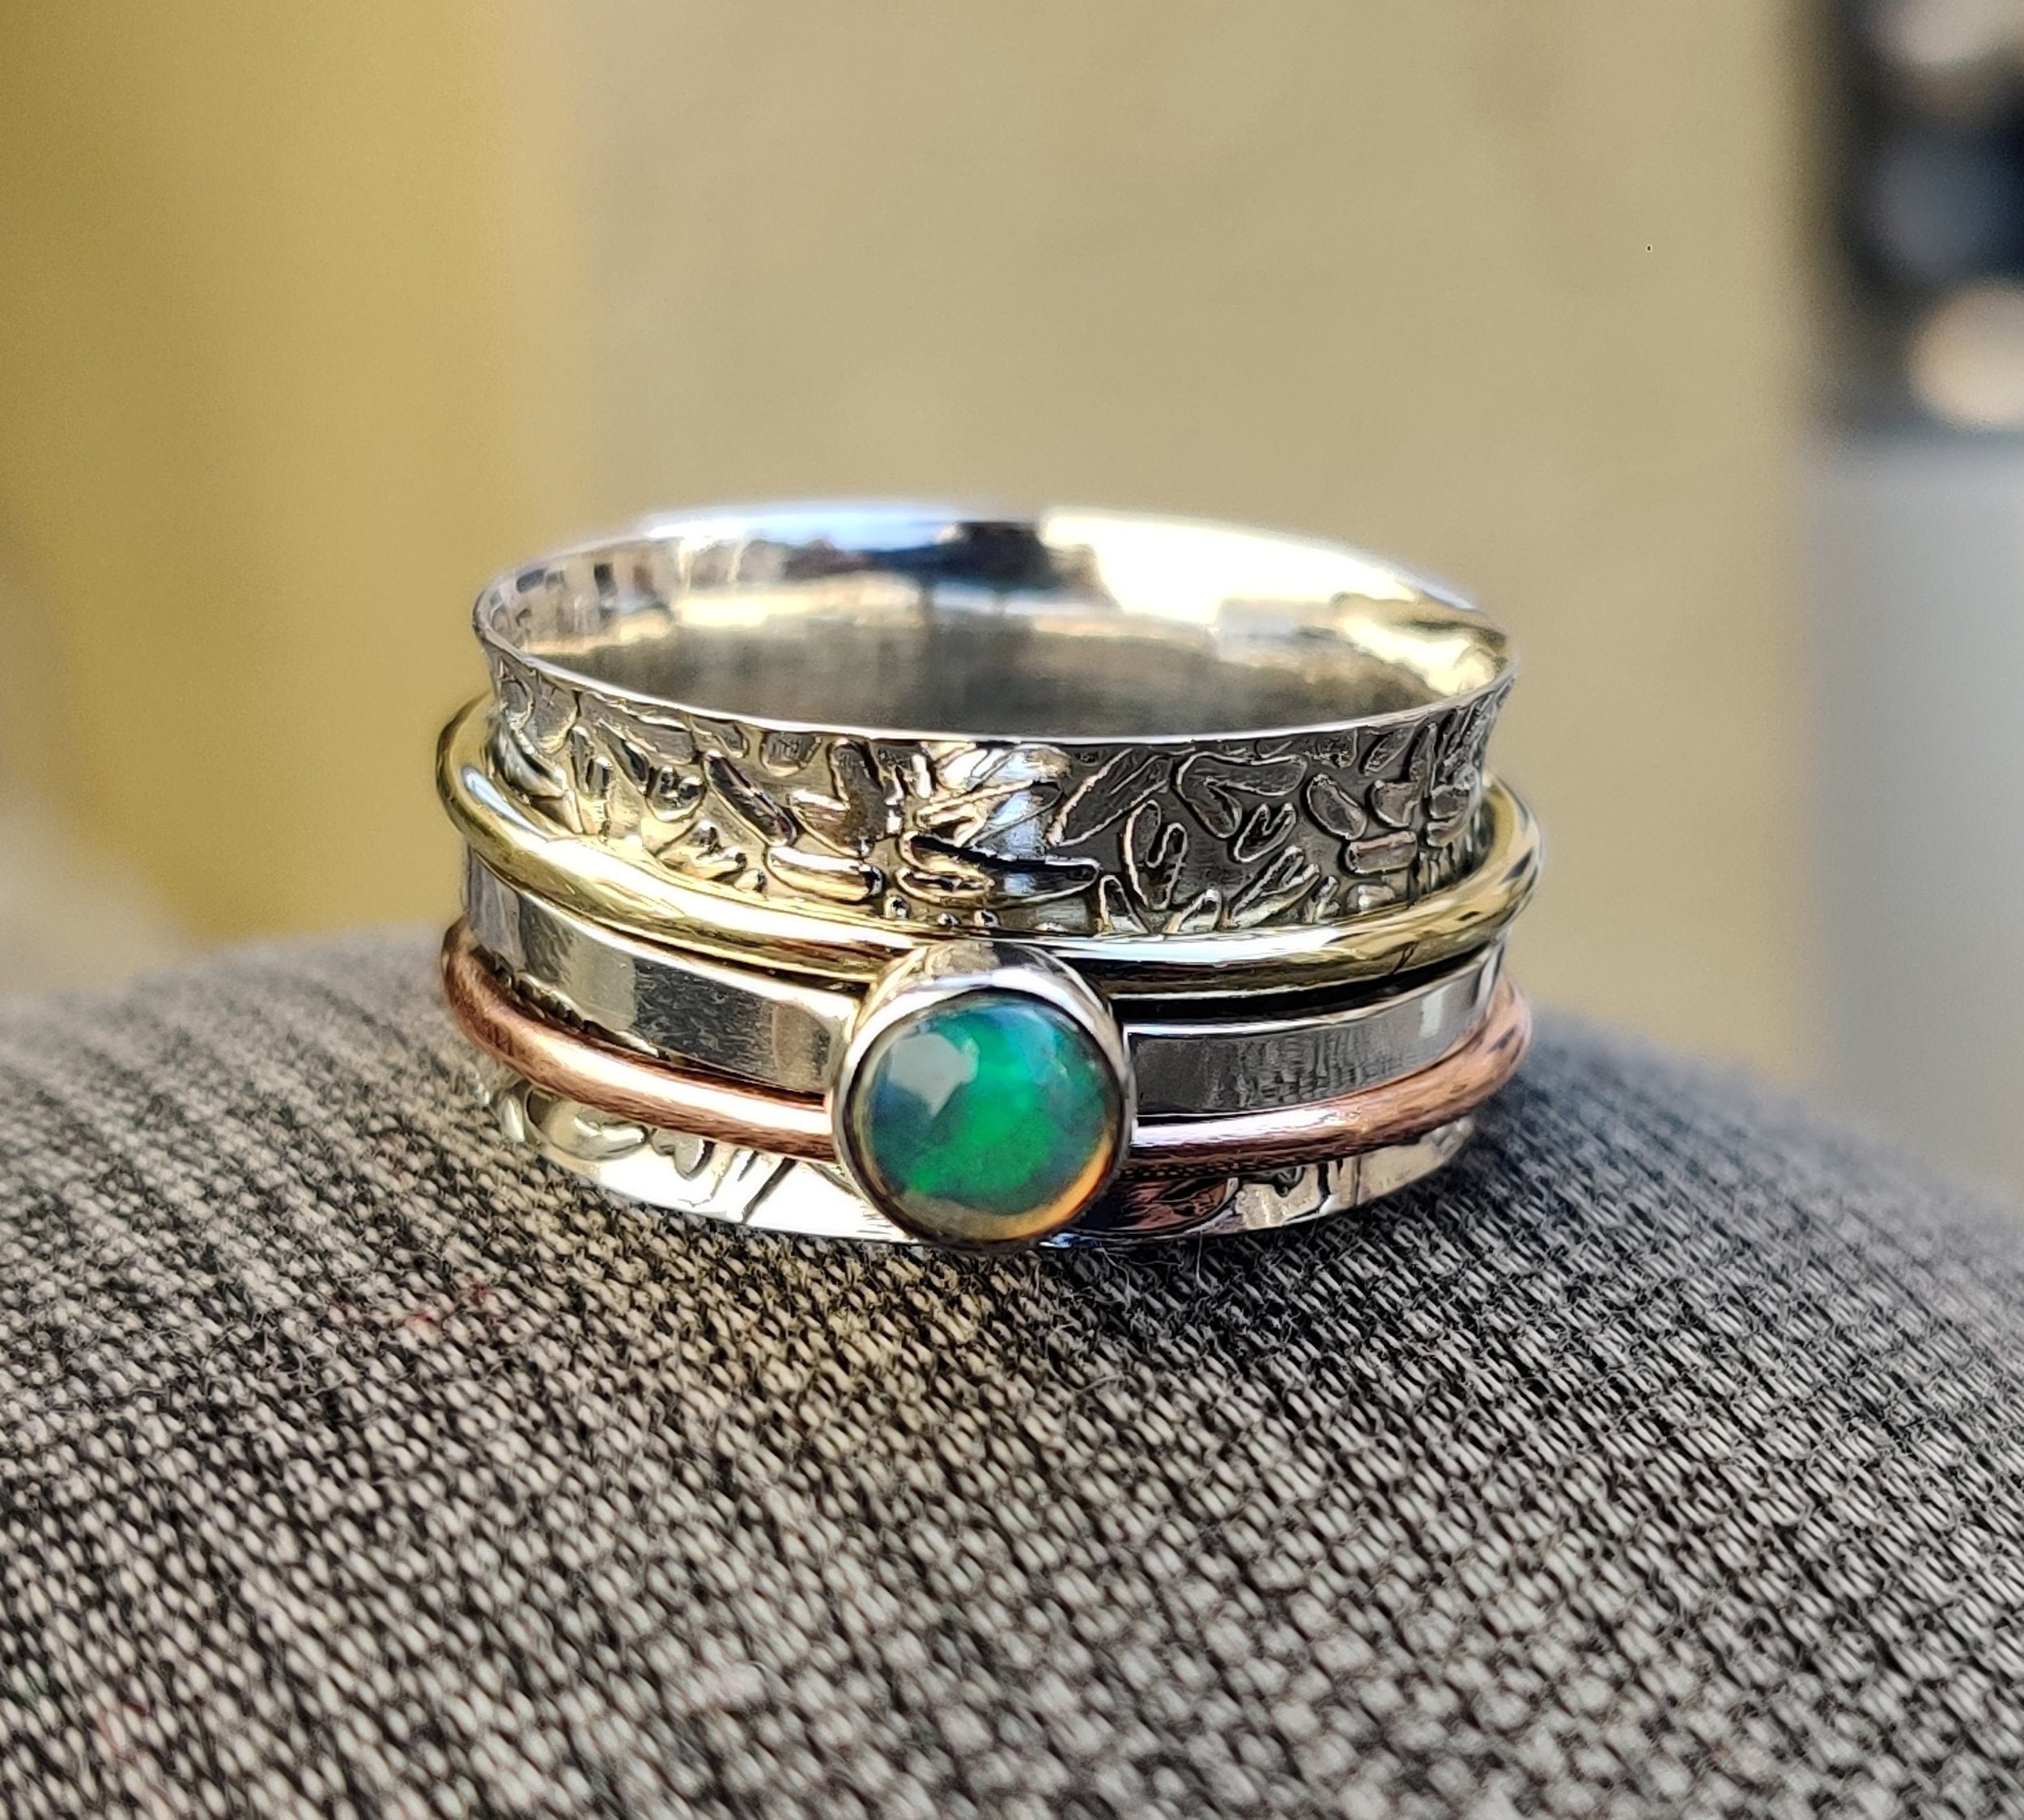 +++++++ Natural Opal Spinner Ring 925 Sterling Silver Ring Meditation Ring Handmade Ring Statement Ring Brass Ring Silver Jewelry